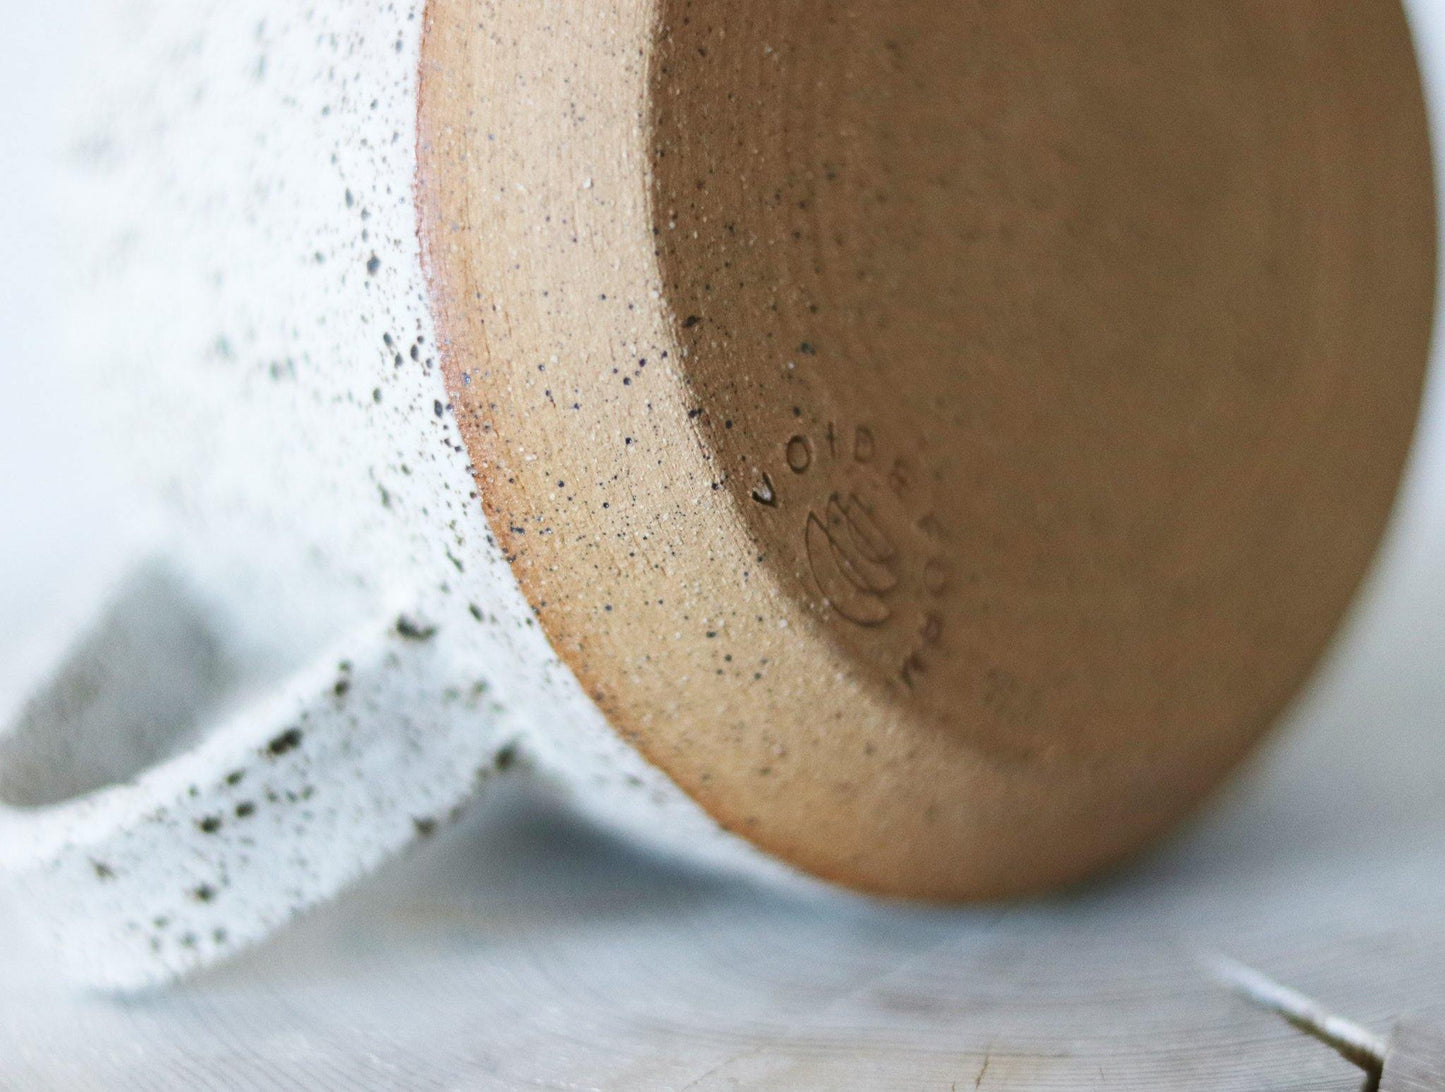 Handmade neutral mug with a speckled clay body and quail speckled glaze. Made by void and form ceramics.